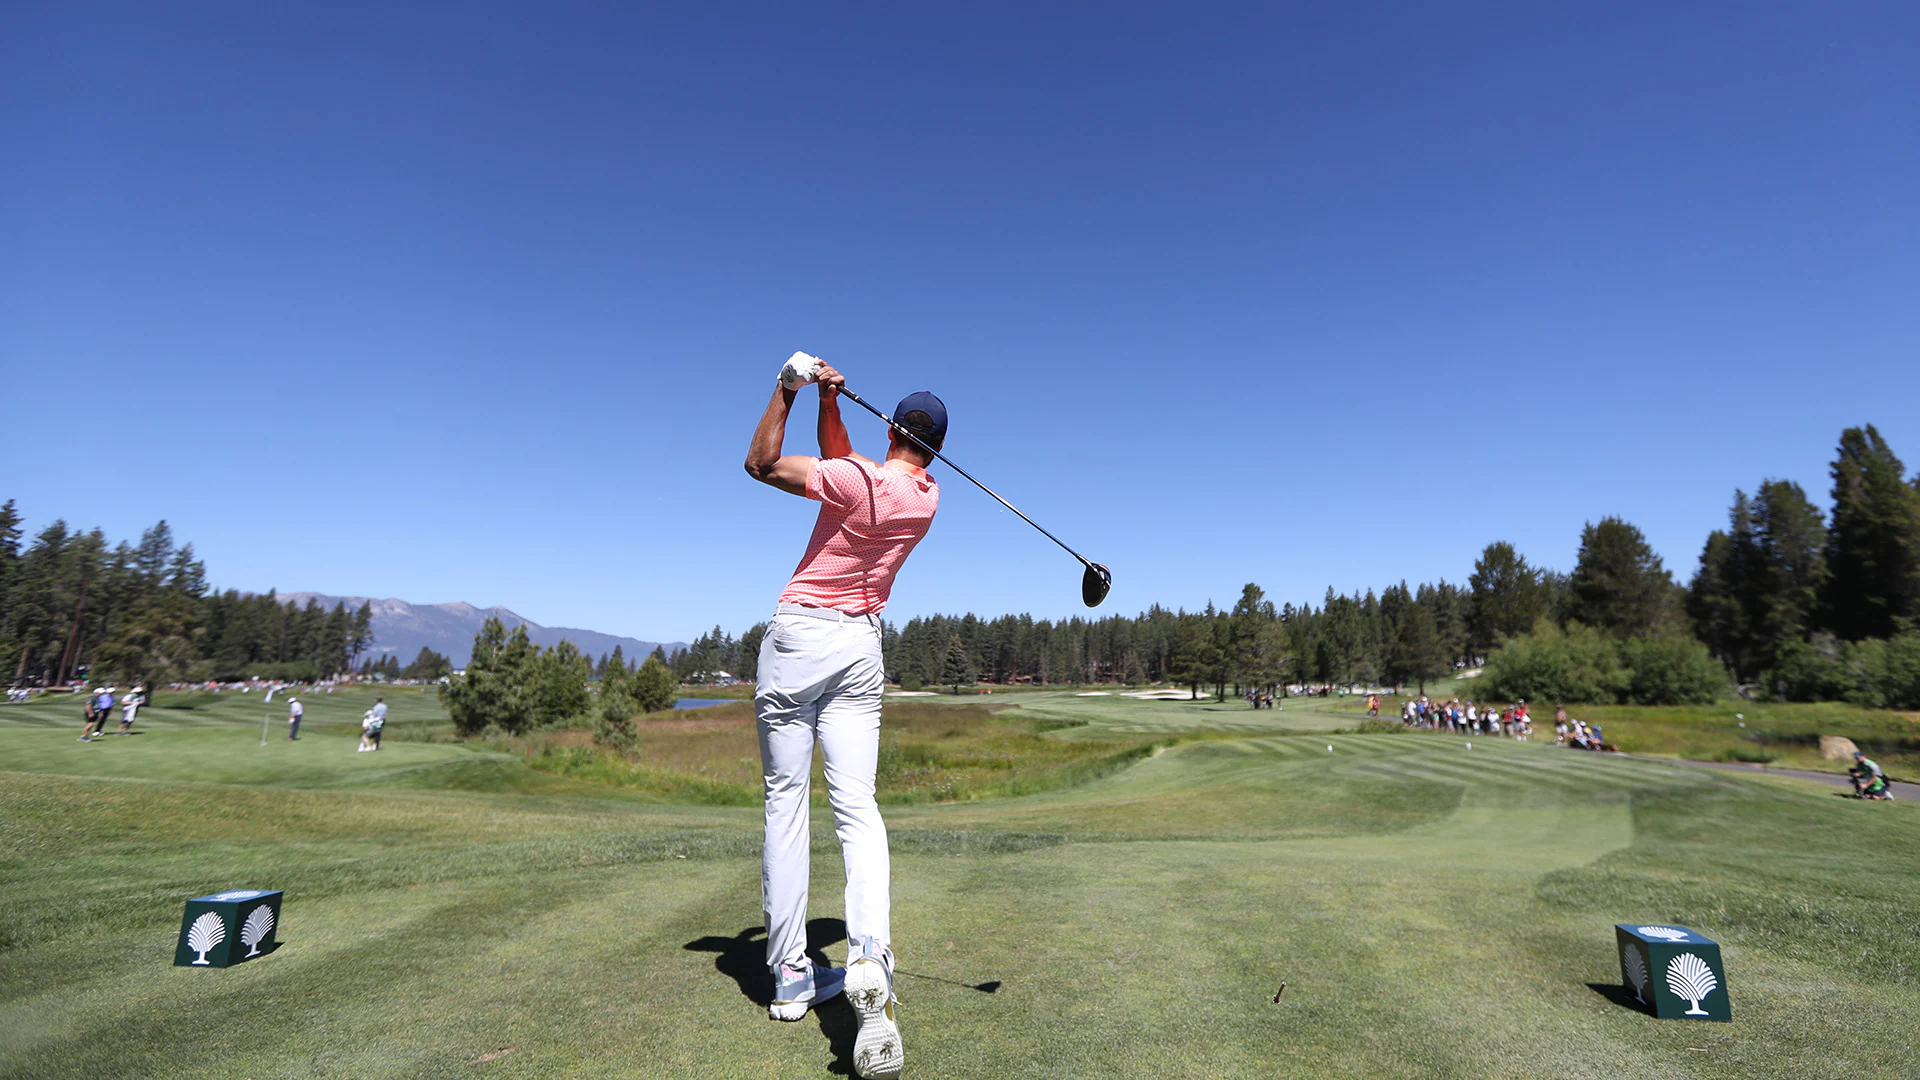 WATCH: NBA Finals MVP Steph Curry holes out for eagle at the American Century Championship